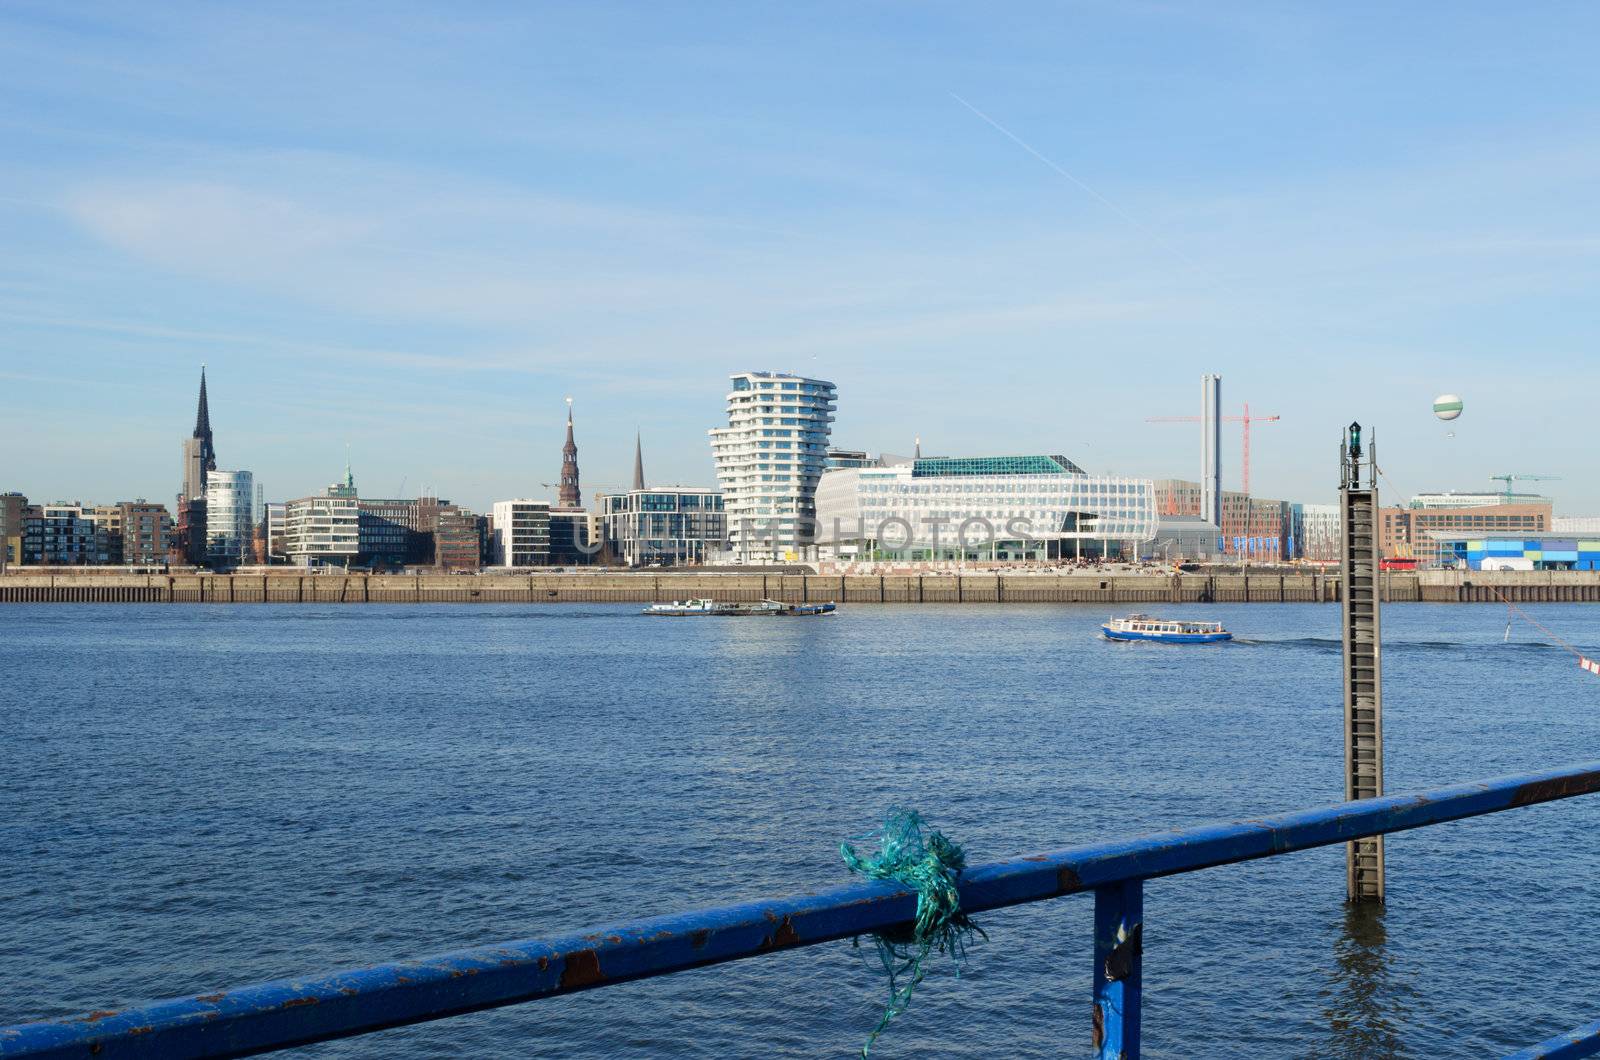 View towards Hamburg from the south. Focus on railing.